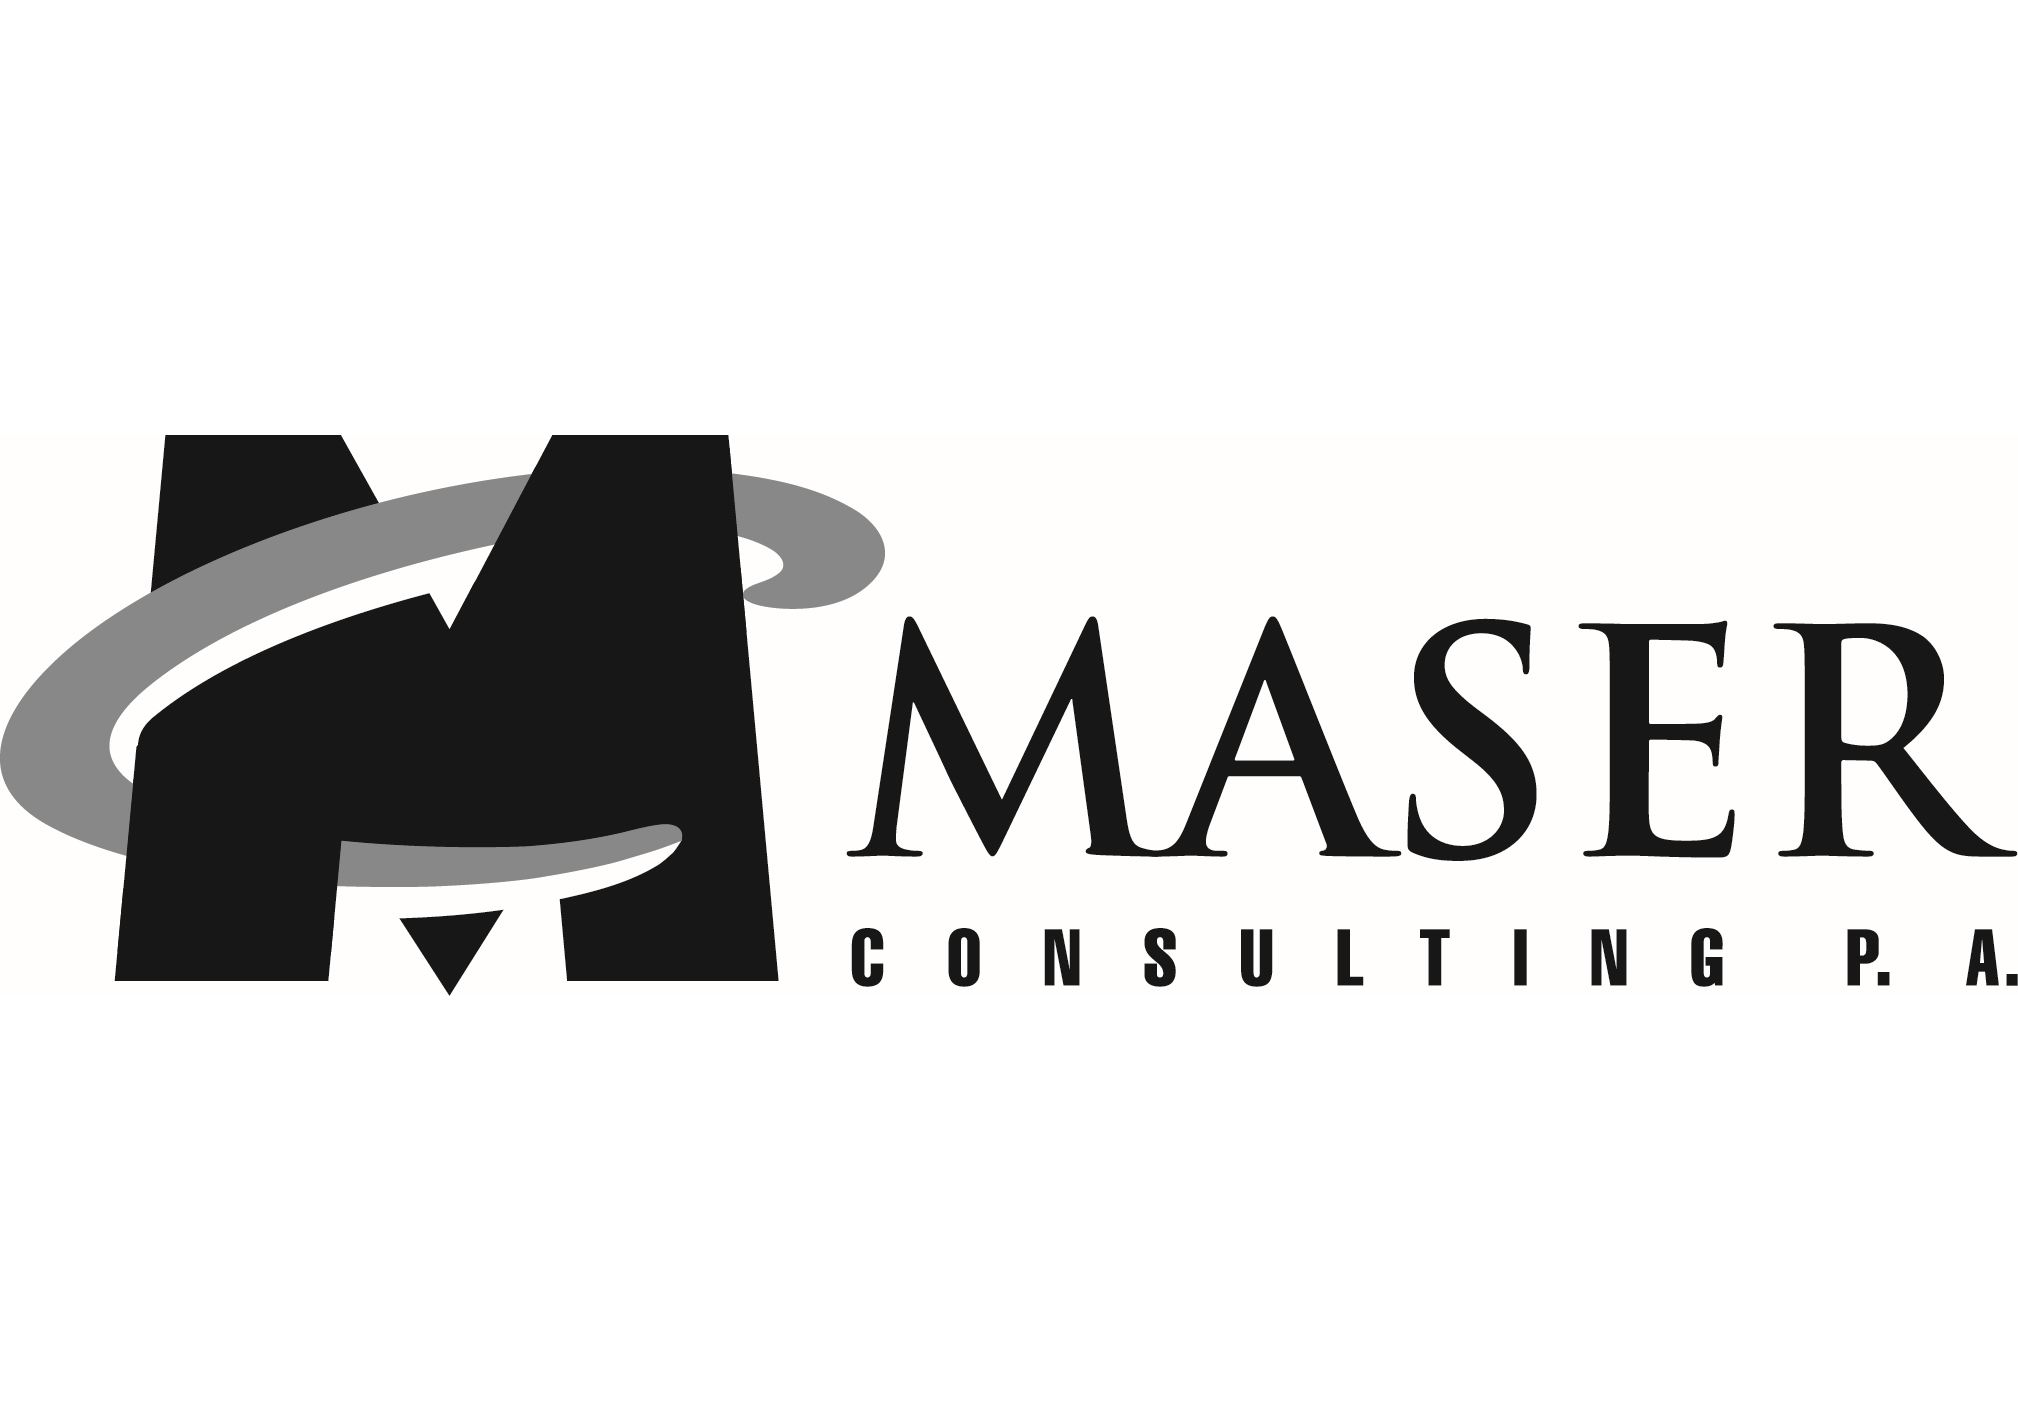 Maser Consulting P.A.